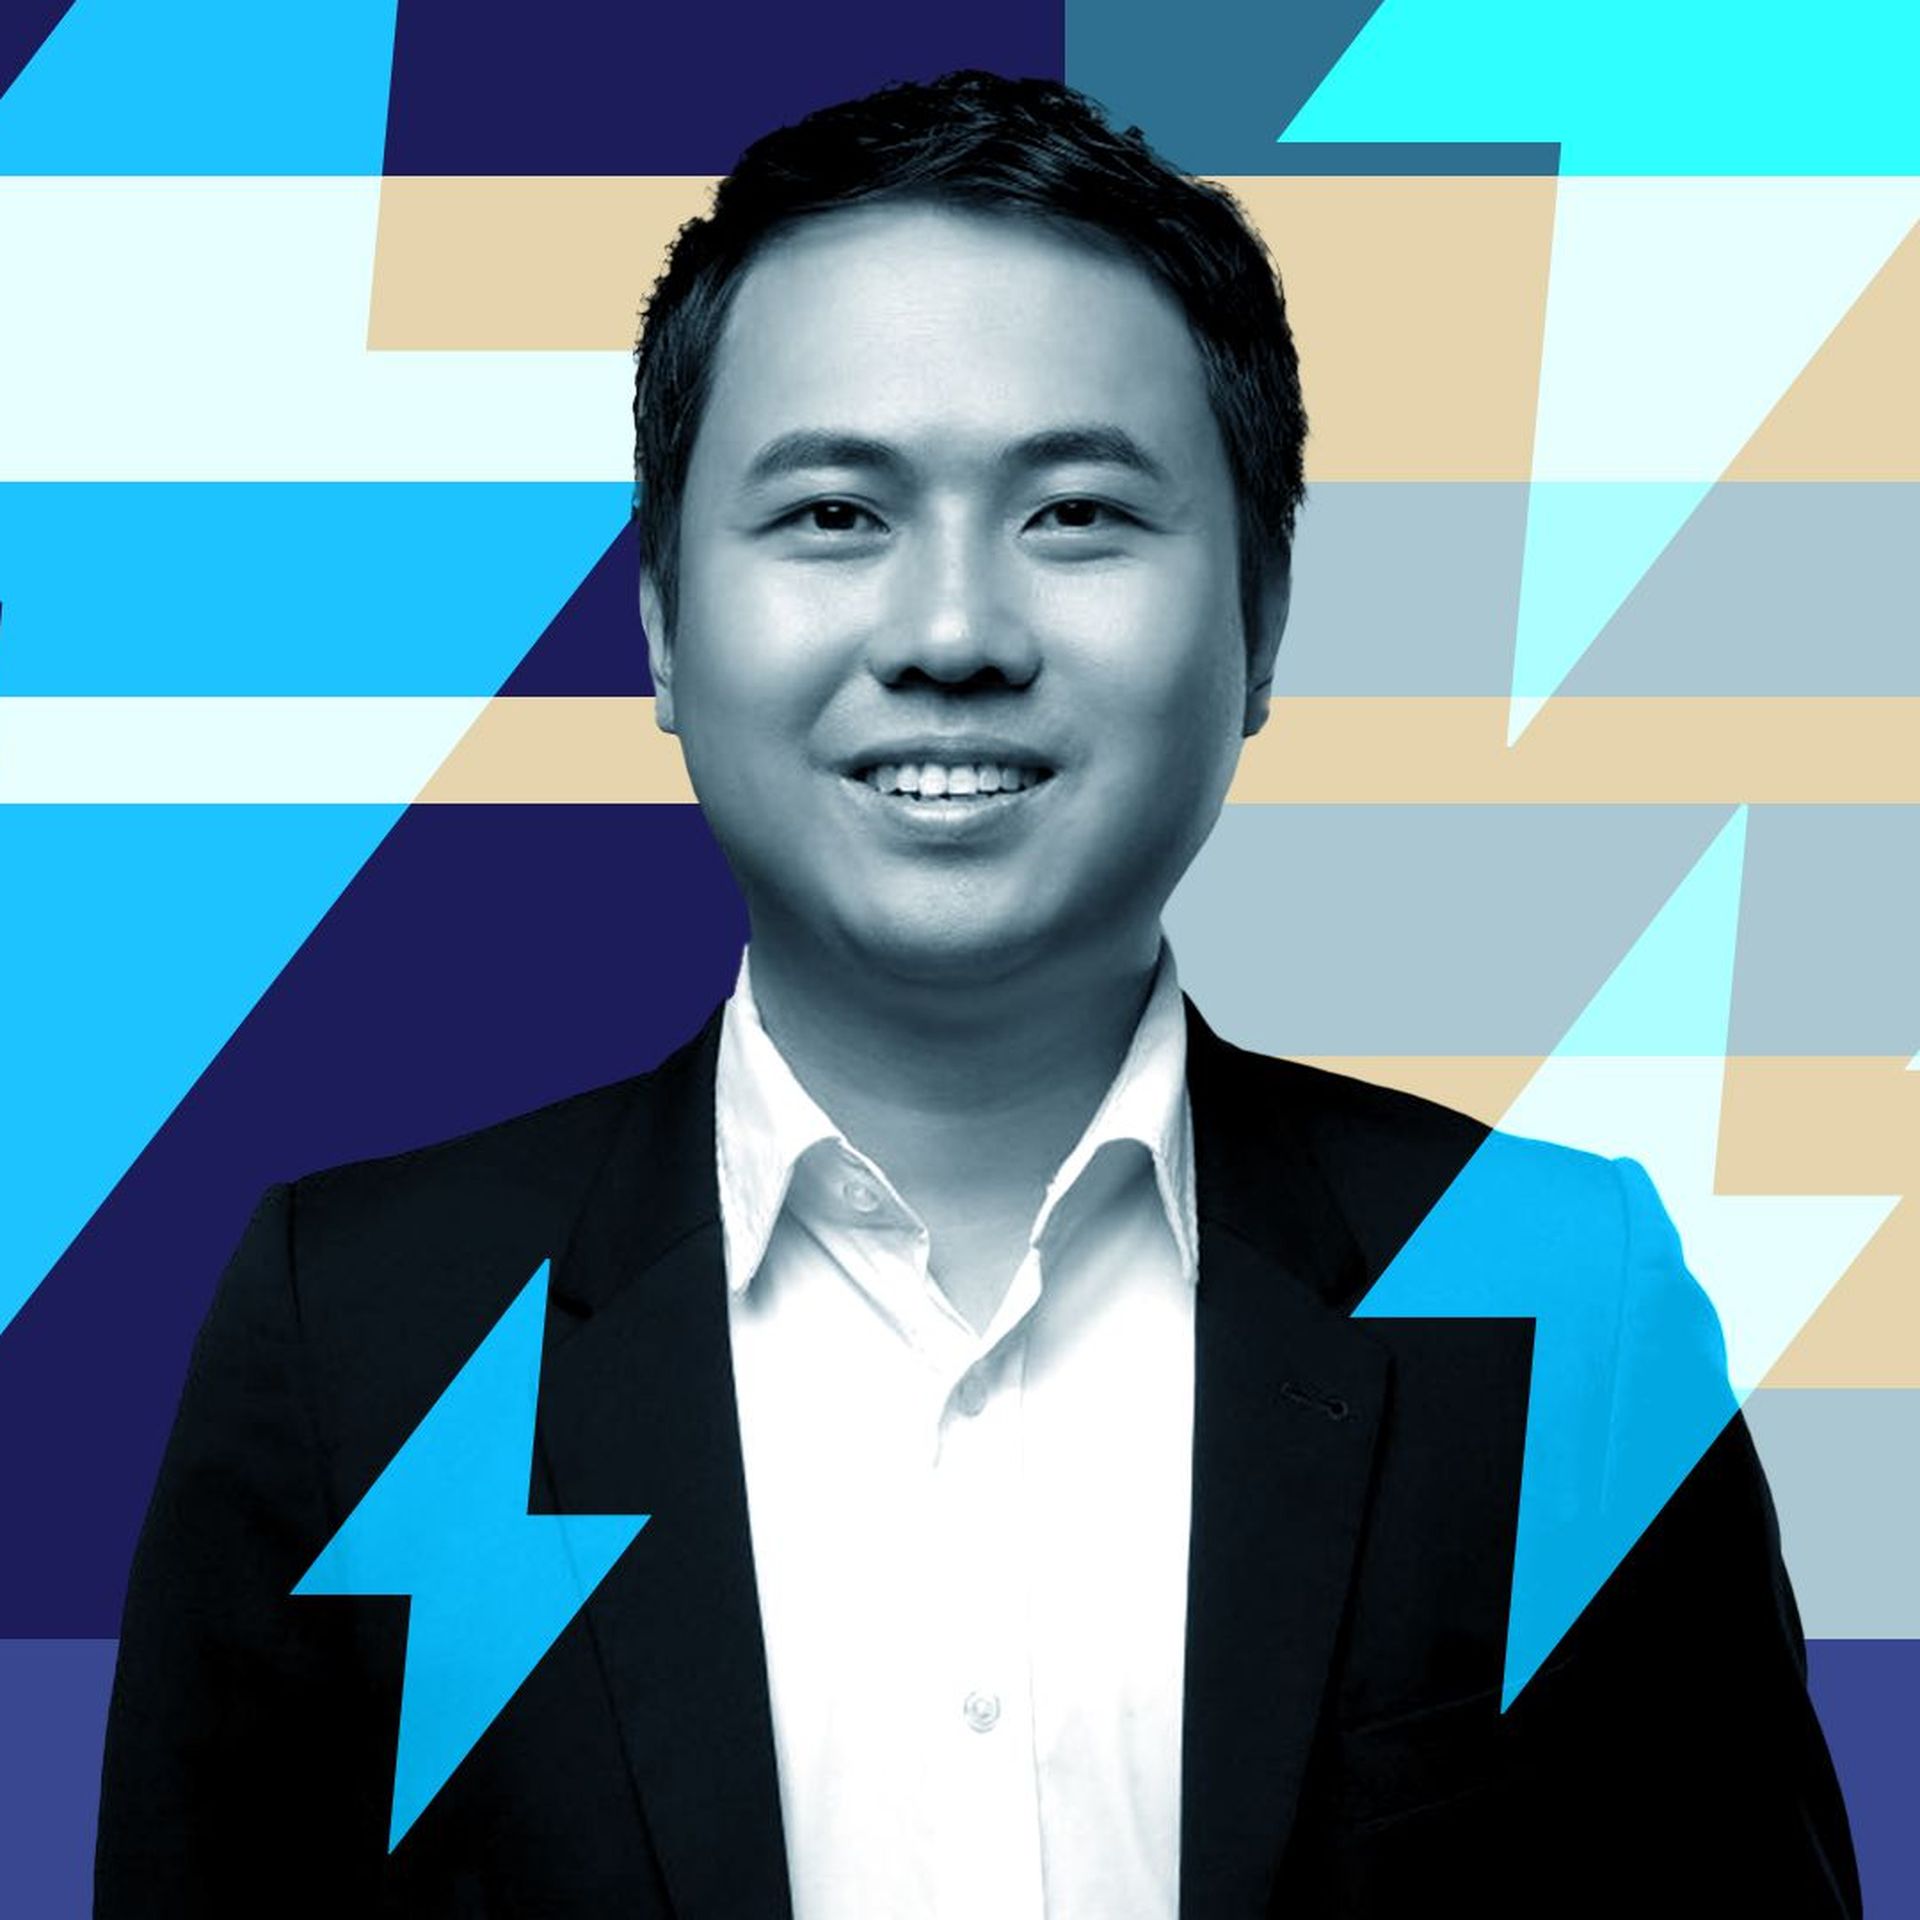 Photo illustration of Steven Yang with abstract shapes and Anker's lightning bolt logo.